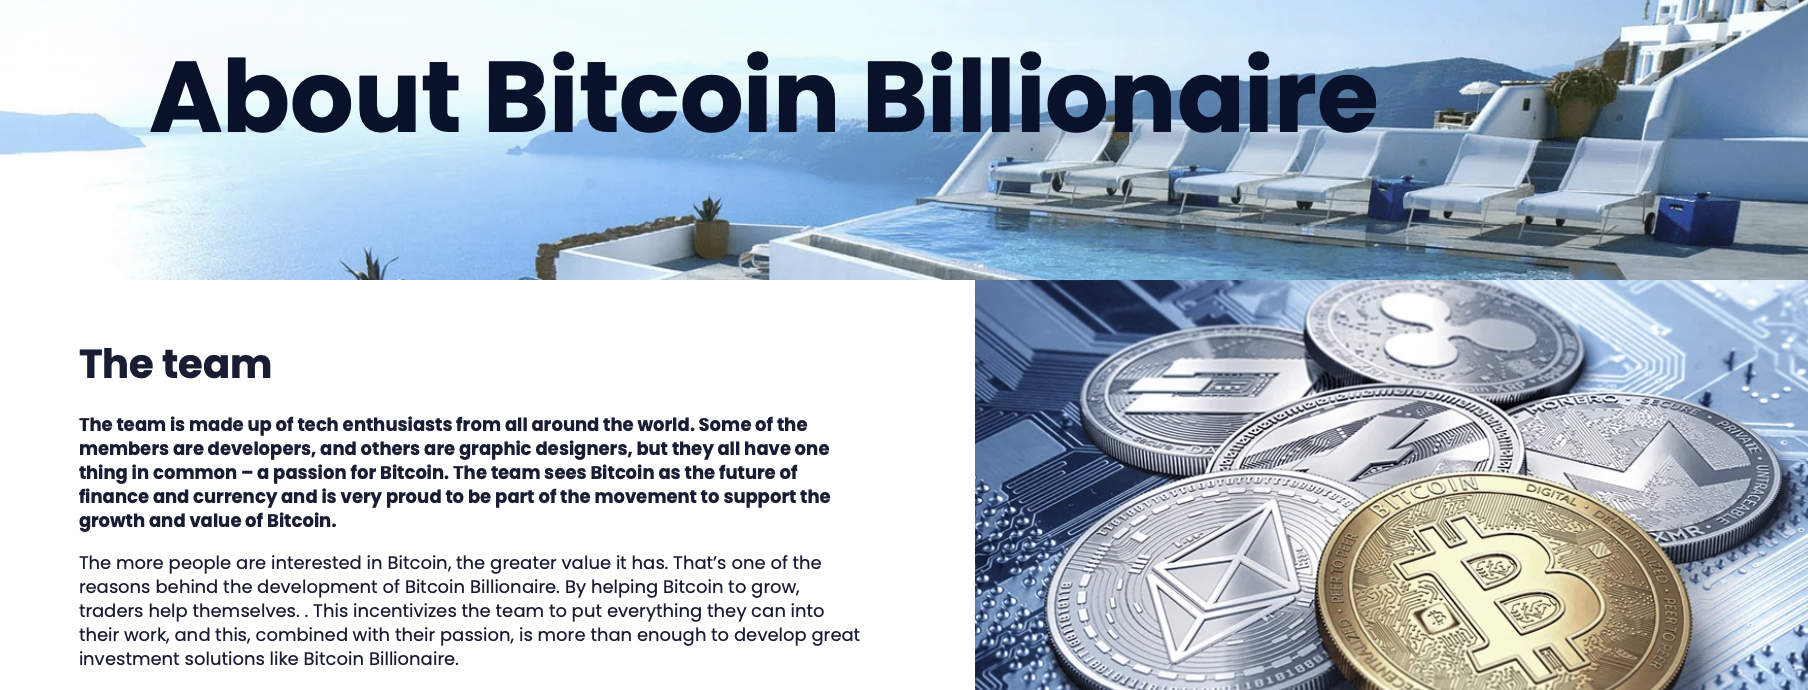 Information about the team of Bitcoin Billionaire